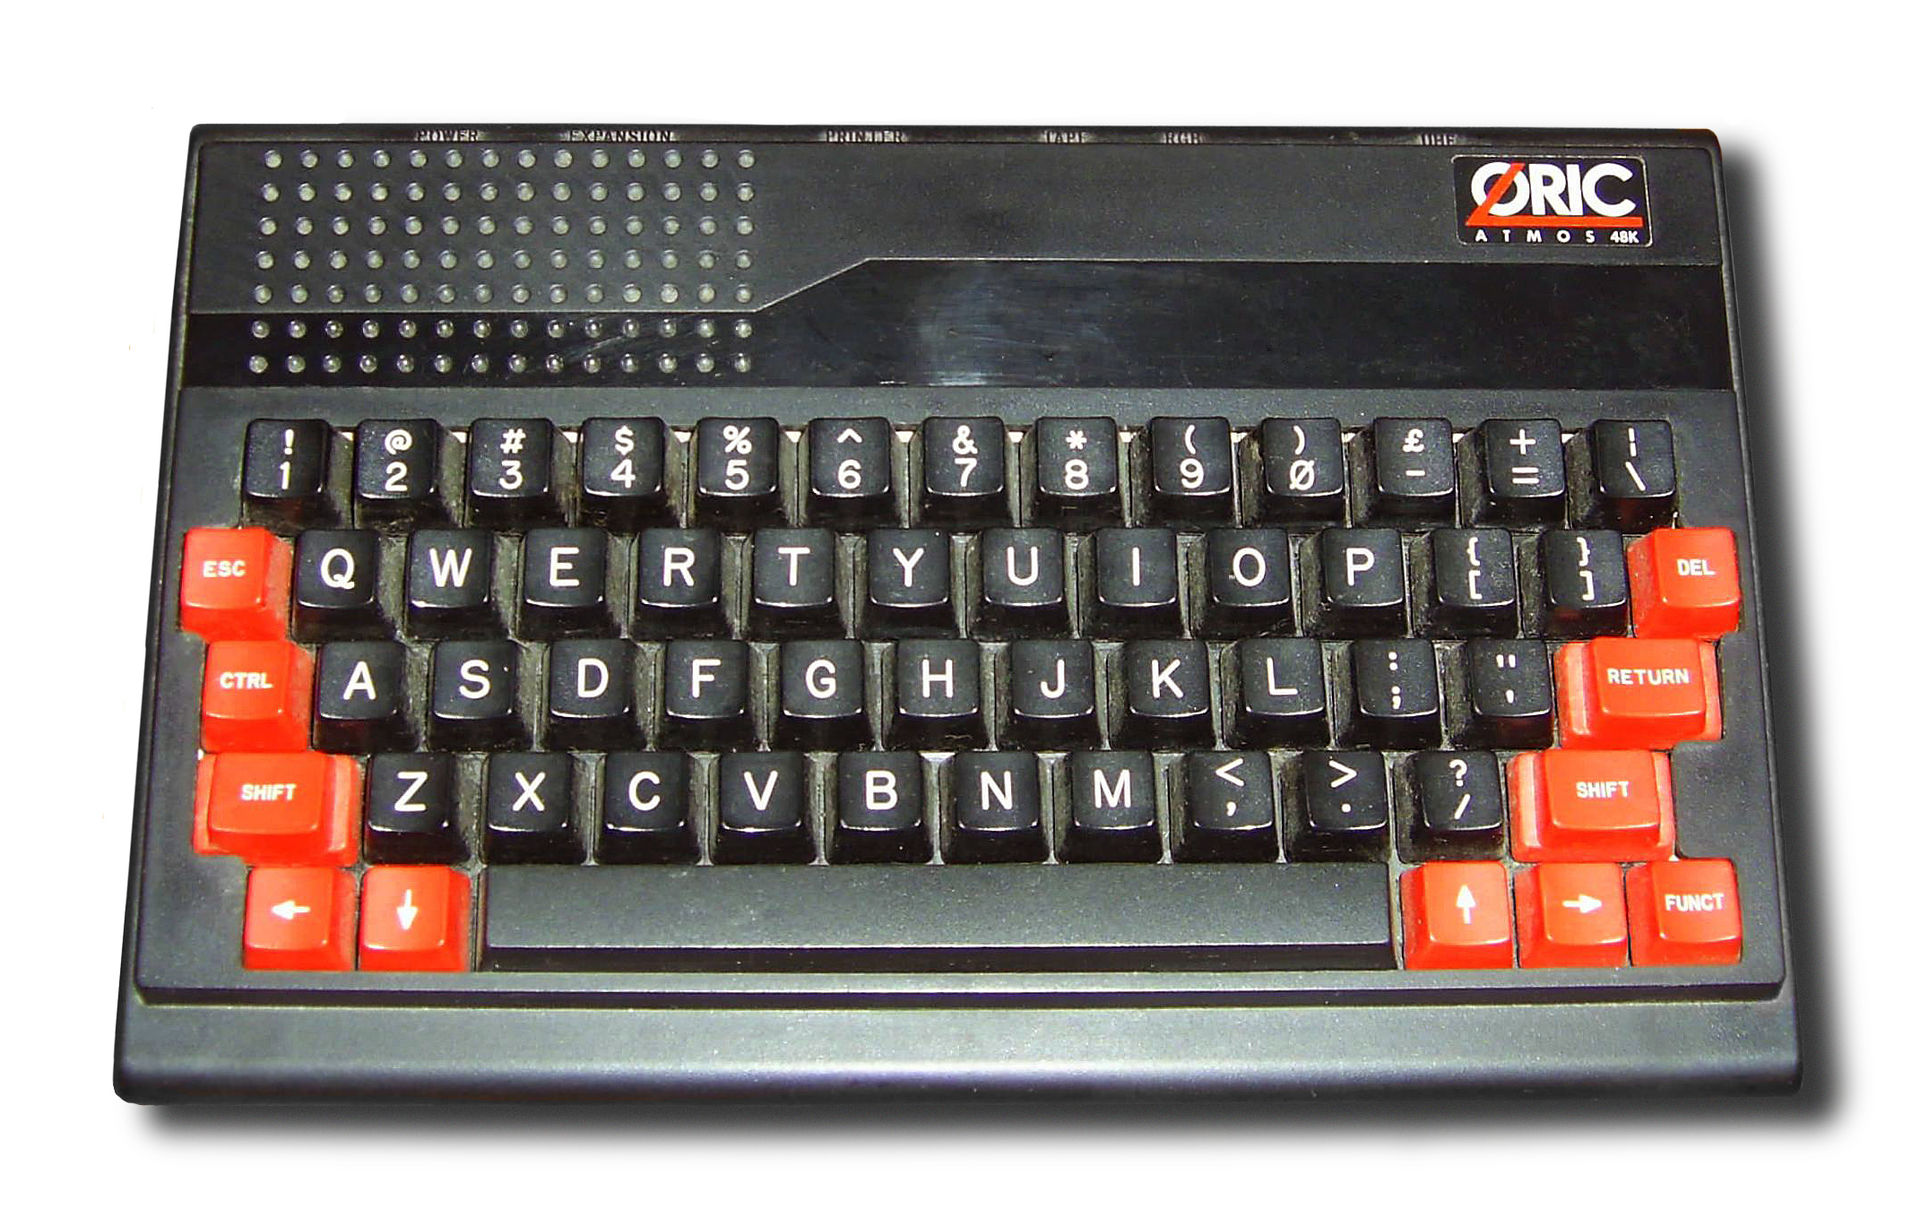 The Oric Atmos, one of the first computers Mathieu ever saw.